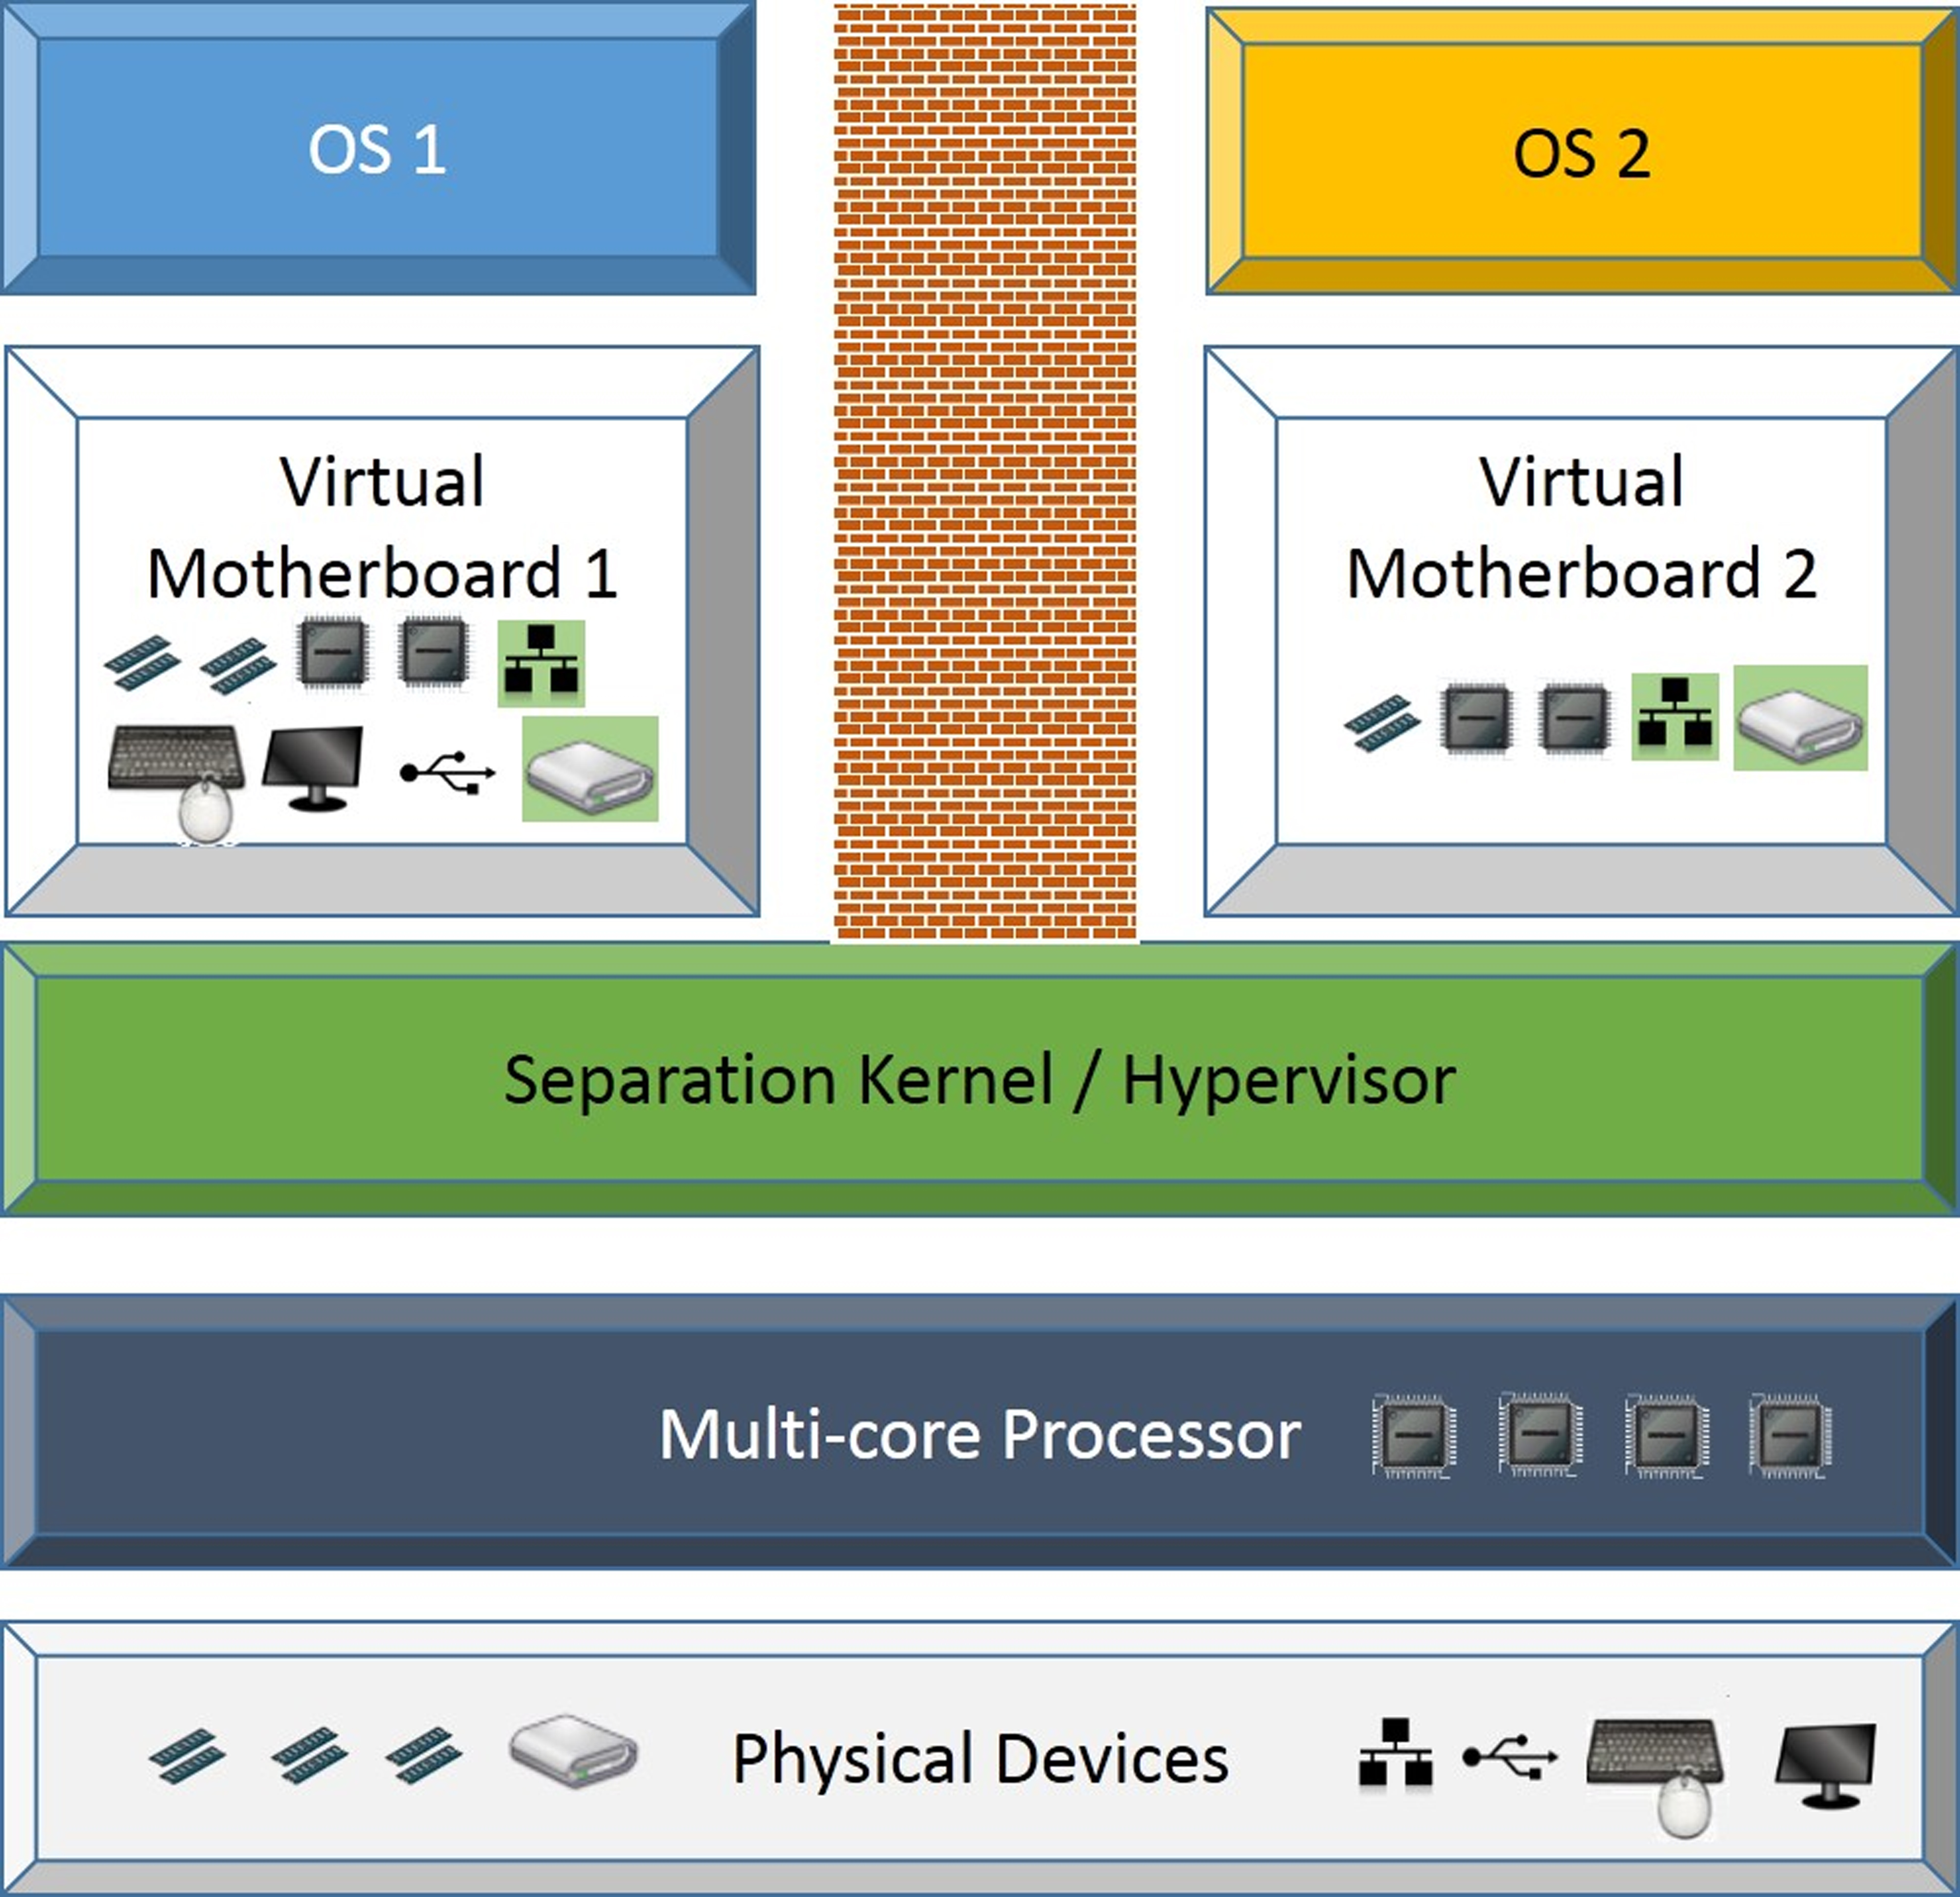 Figure 1: Type-0 hypervisor offering two secure virtual motherboards to guest operating systems